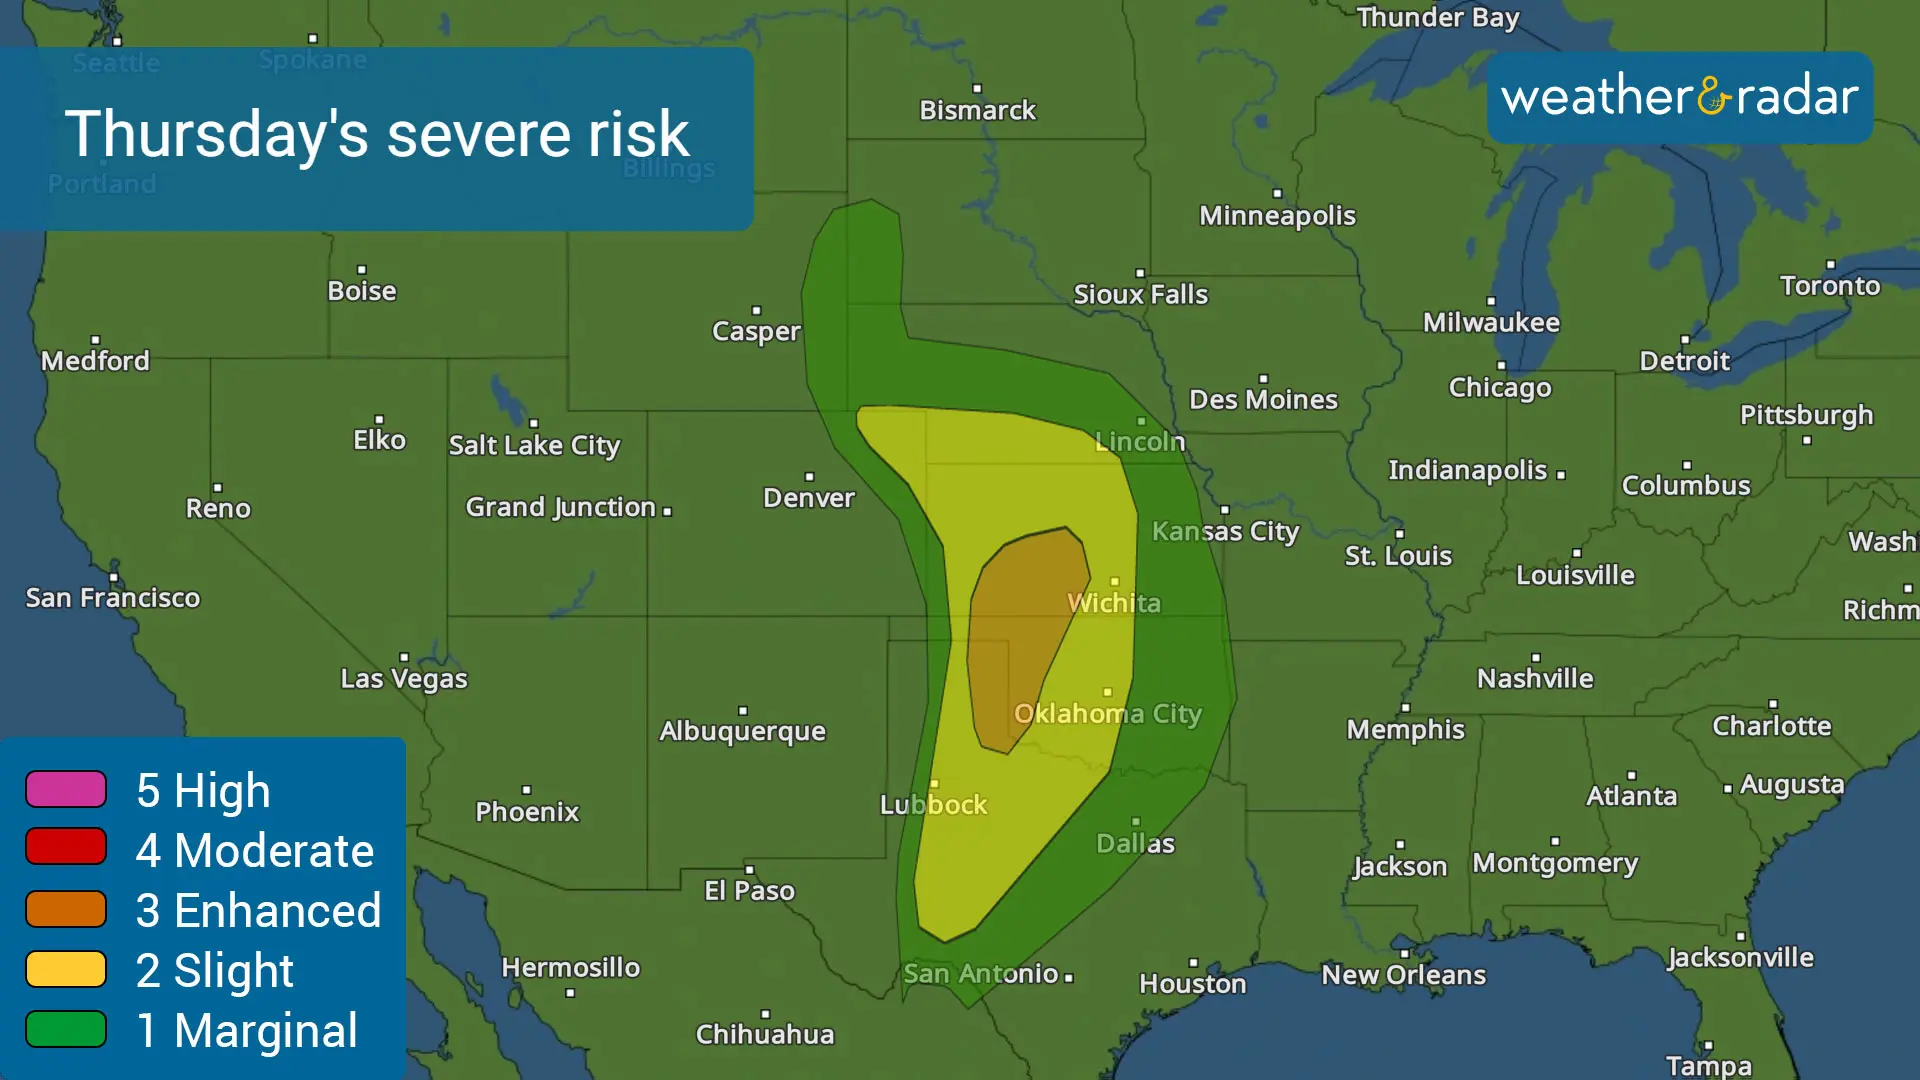 Severe conditions intensifies and expands across the Central Plains